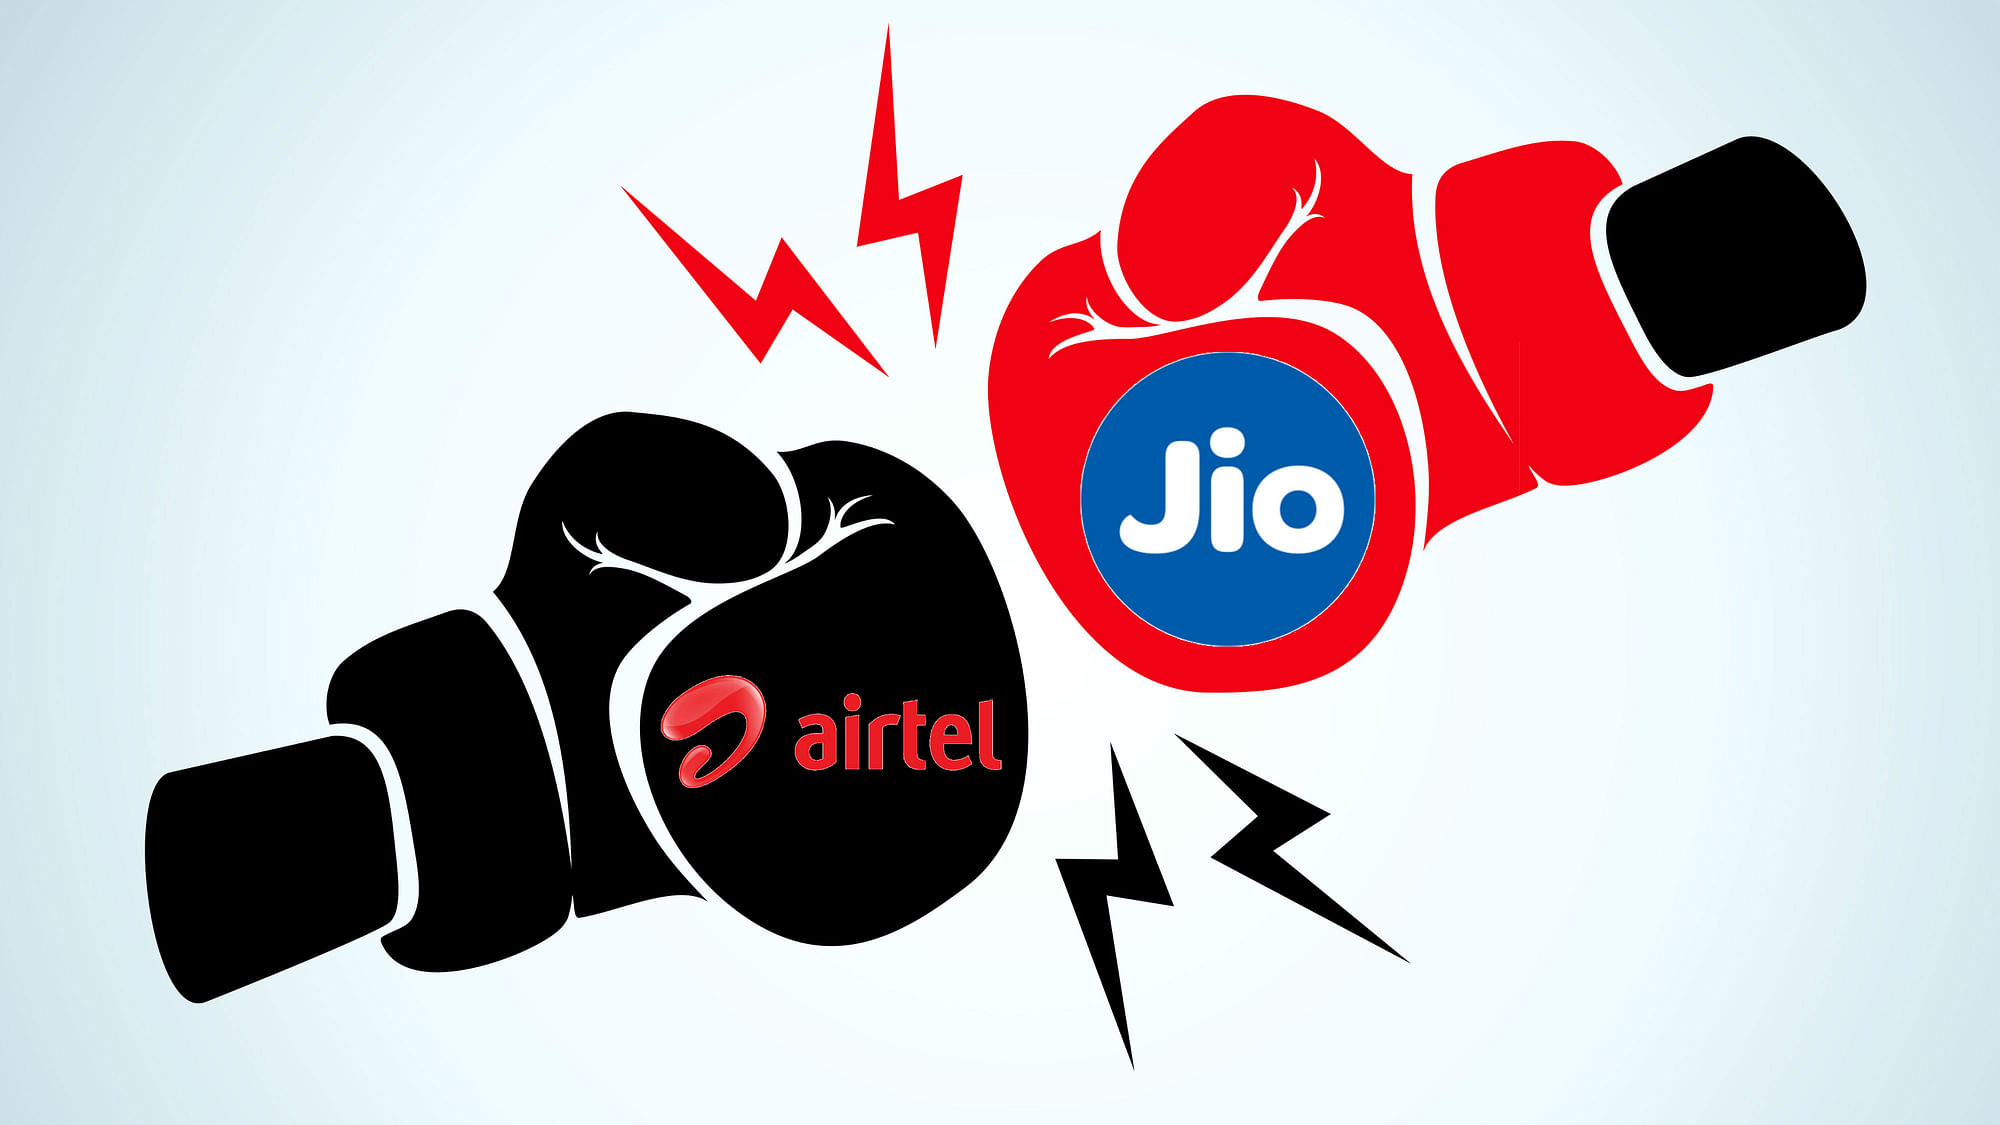 With Airtel TV and Jio TV, both telcos are going head-to-head yet again. 